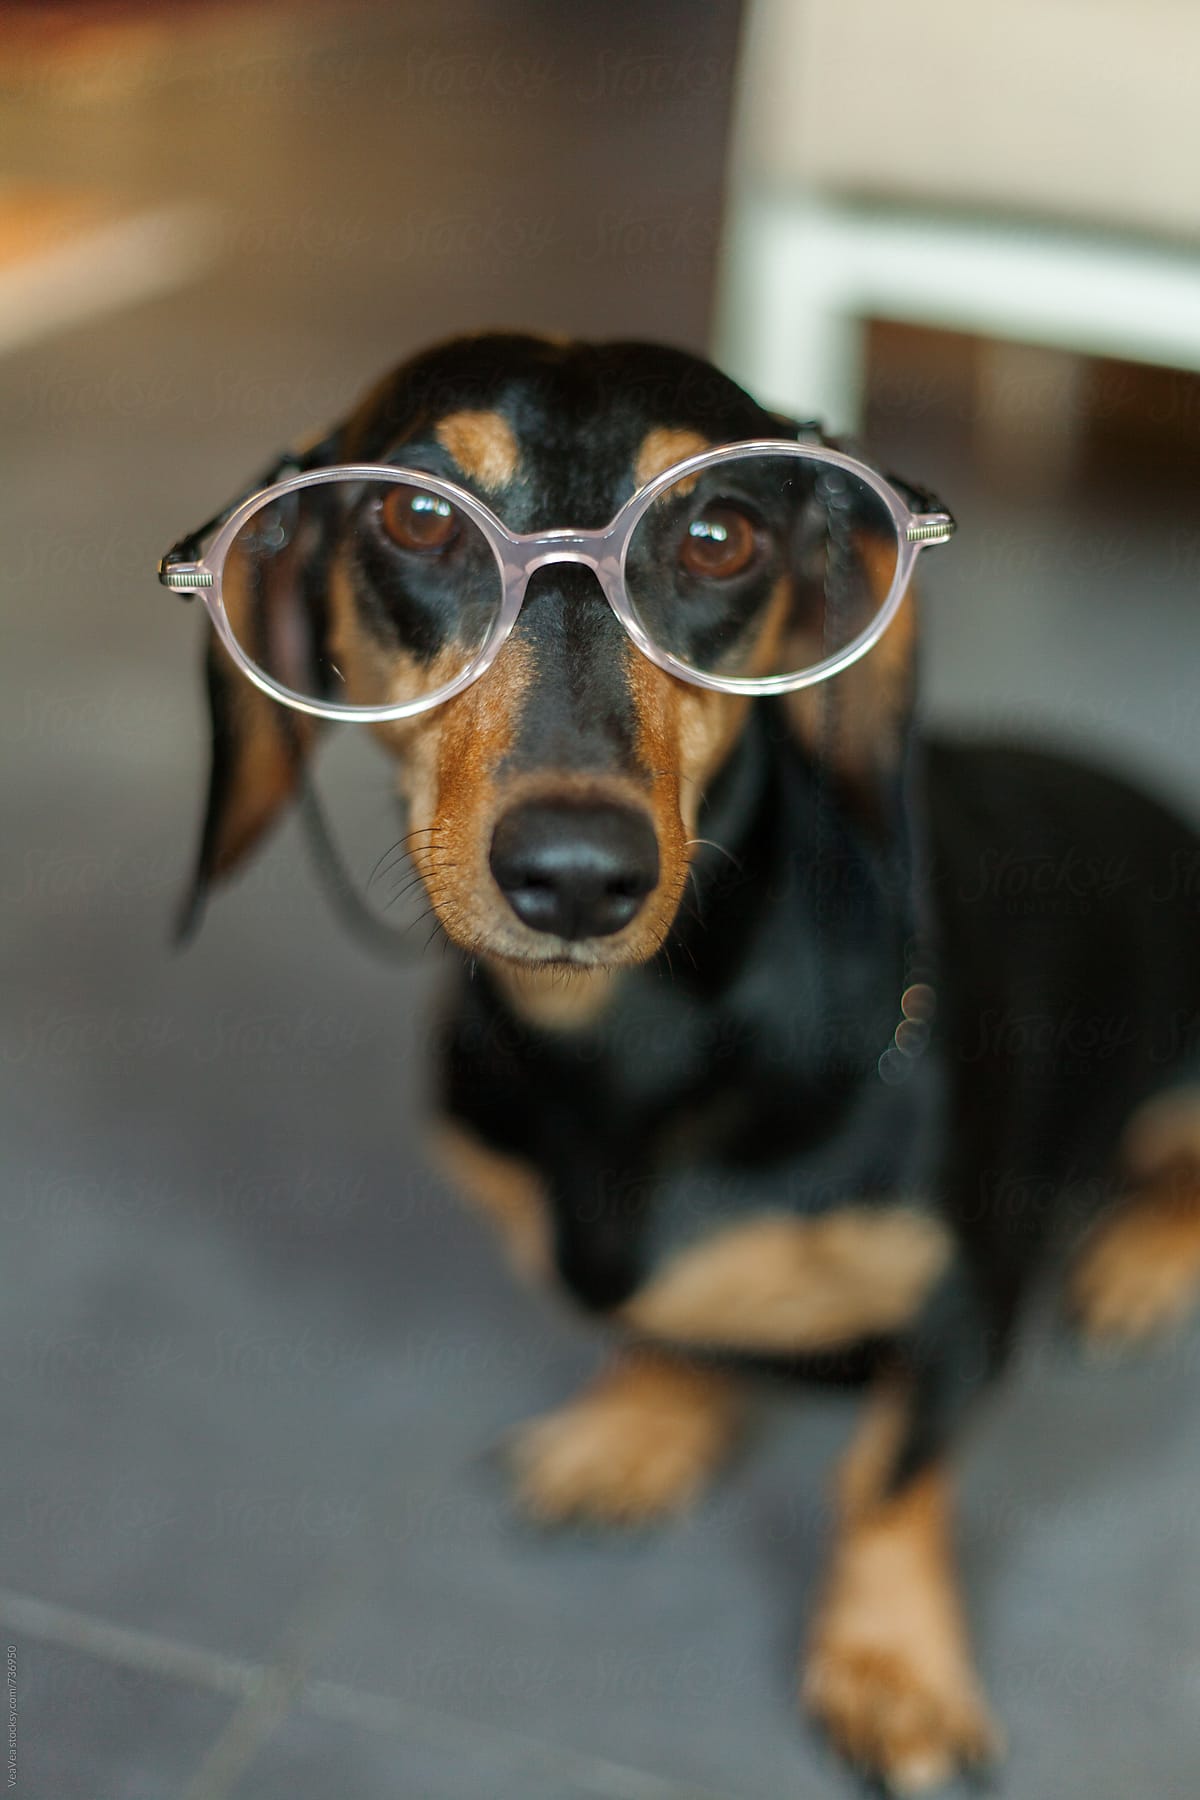 Cute dachshund wearing glasses looking at camera